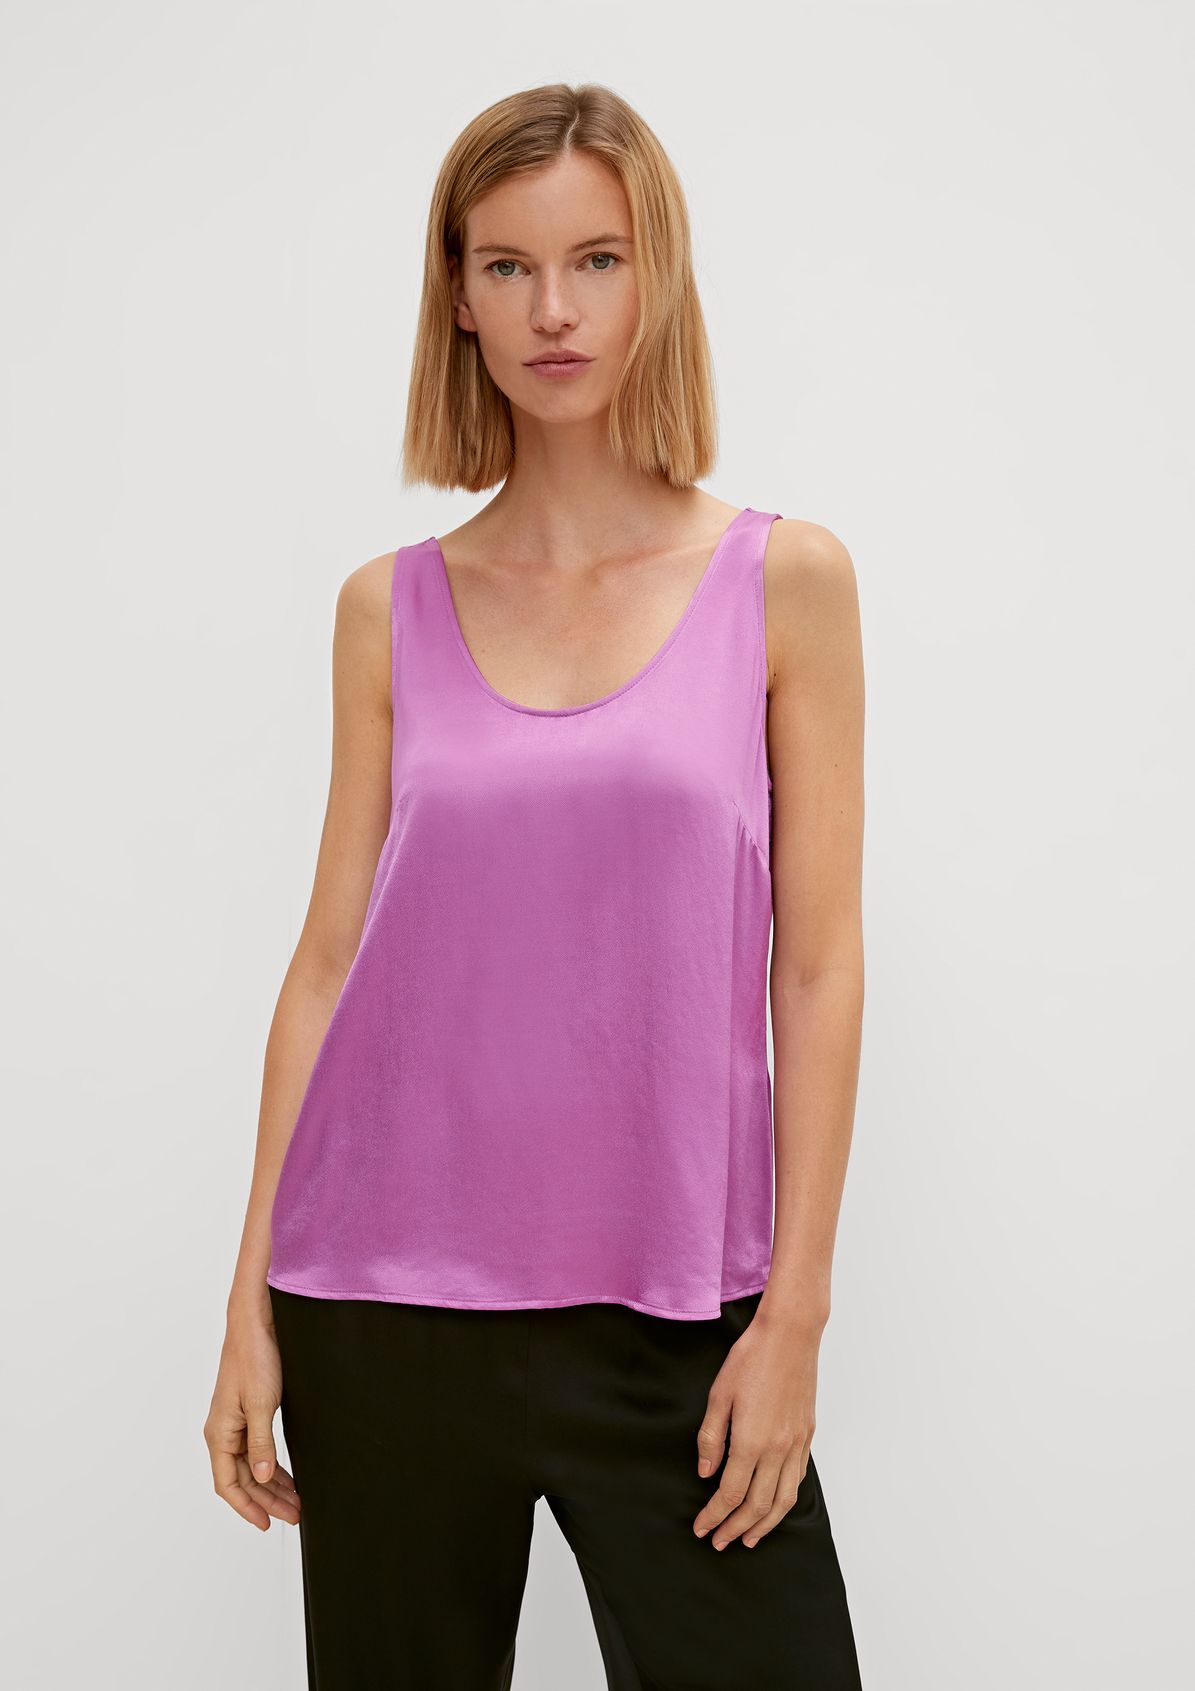 Shimmering viscose top from comma